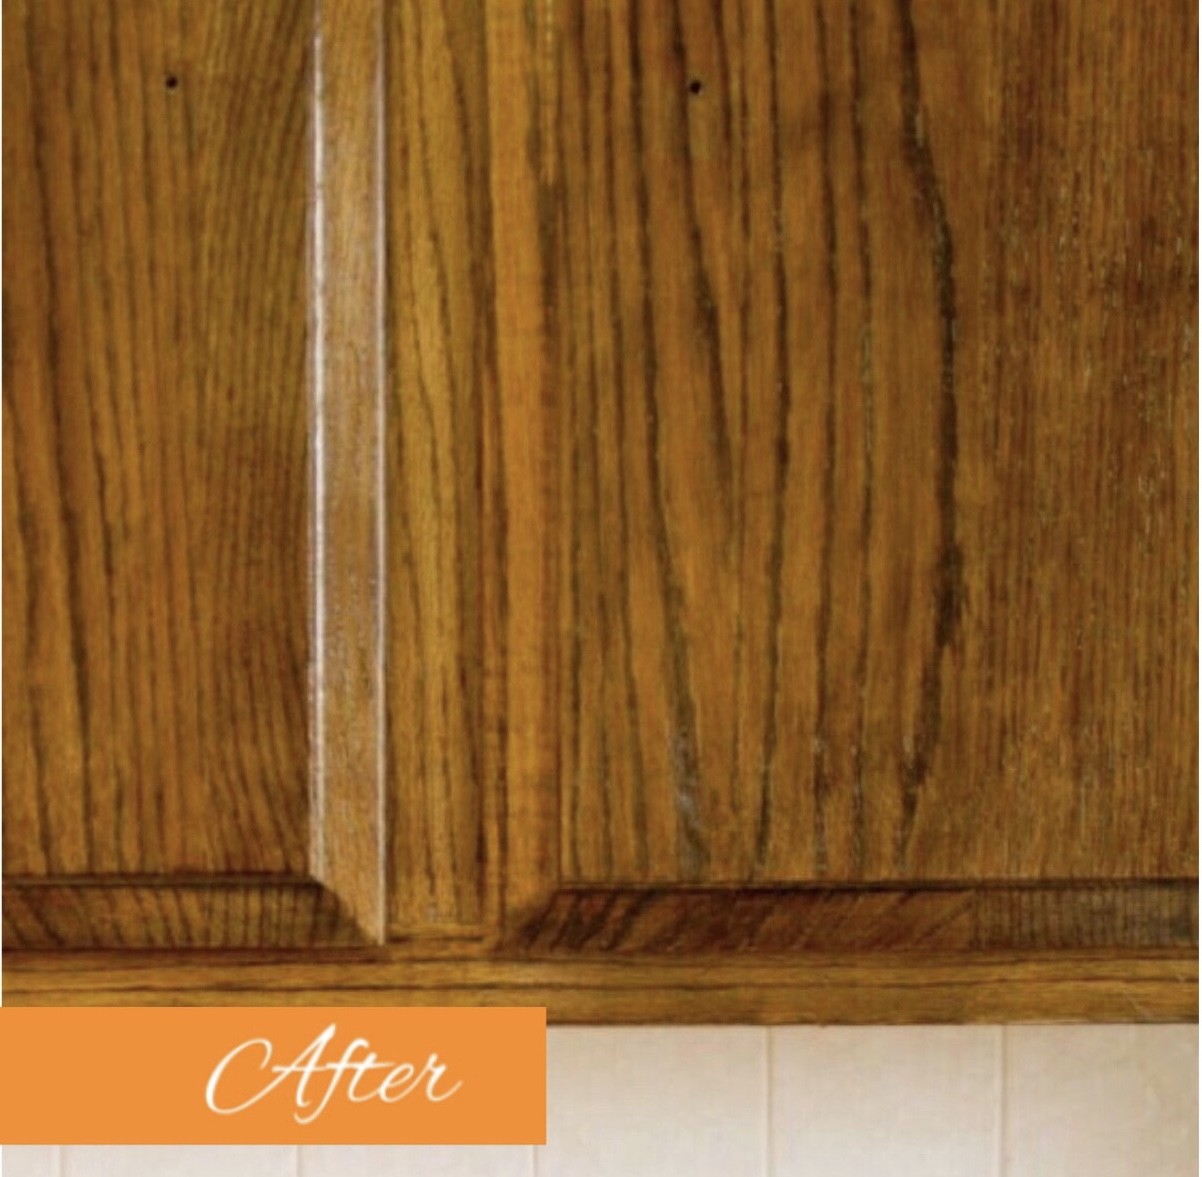 After-Before and after of a custom cabinet refinishing project